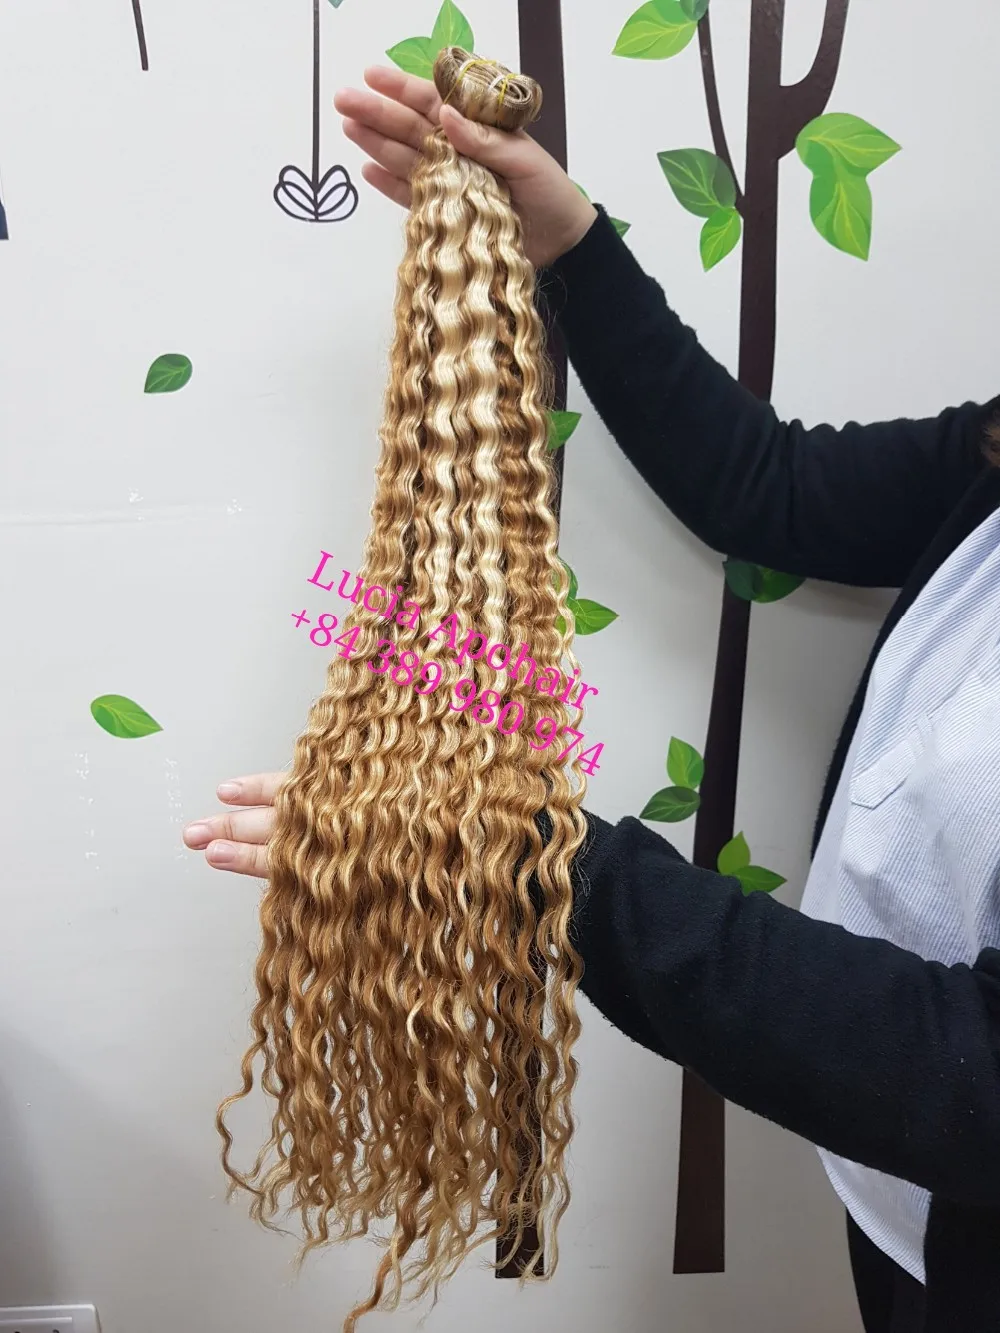 Curly Blonde Mix 613 27 Virgin Weft Same Cutcile Aligned Brazilian Human Hair Extensions Buy Curly Blonde Brasilian Human Hair Same Cuticle Aligned Product On Alibaba Com